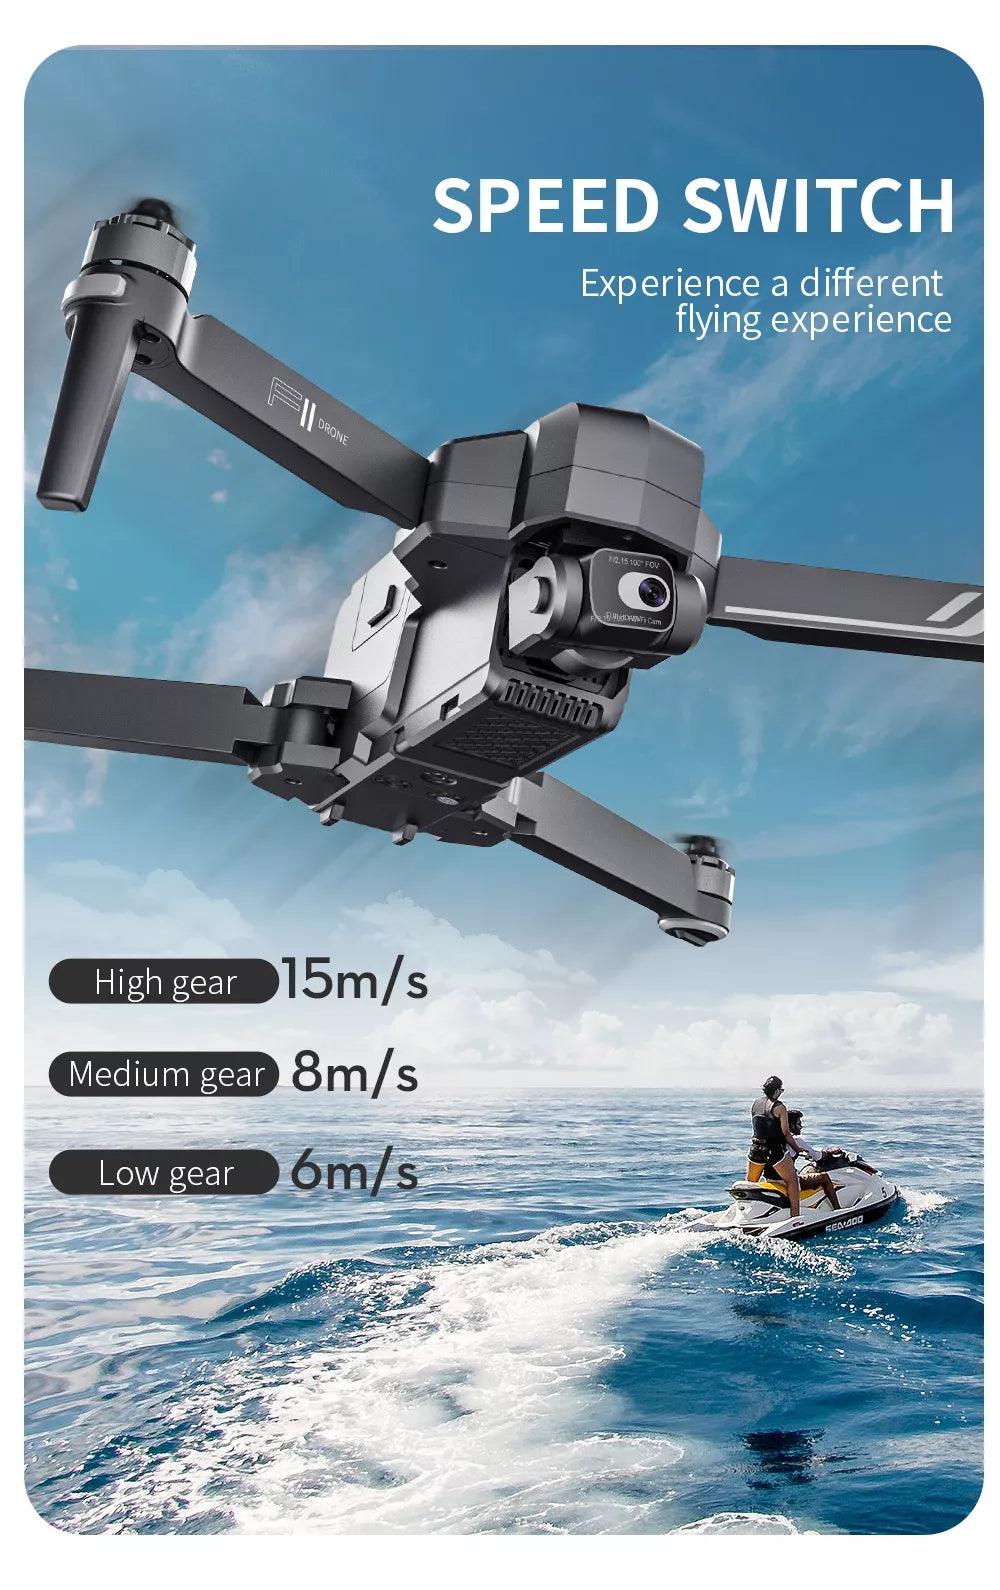 SJRC F11S 4K HD PRO Drone, SPEED SWITCH Experience a different flying experience htthcn 